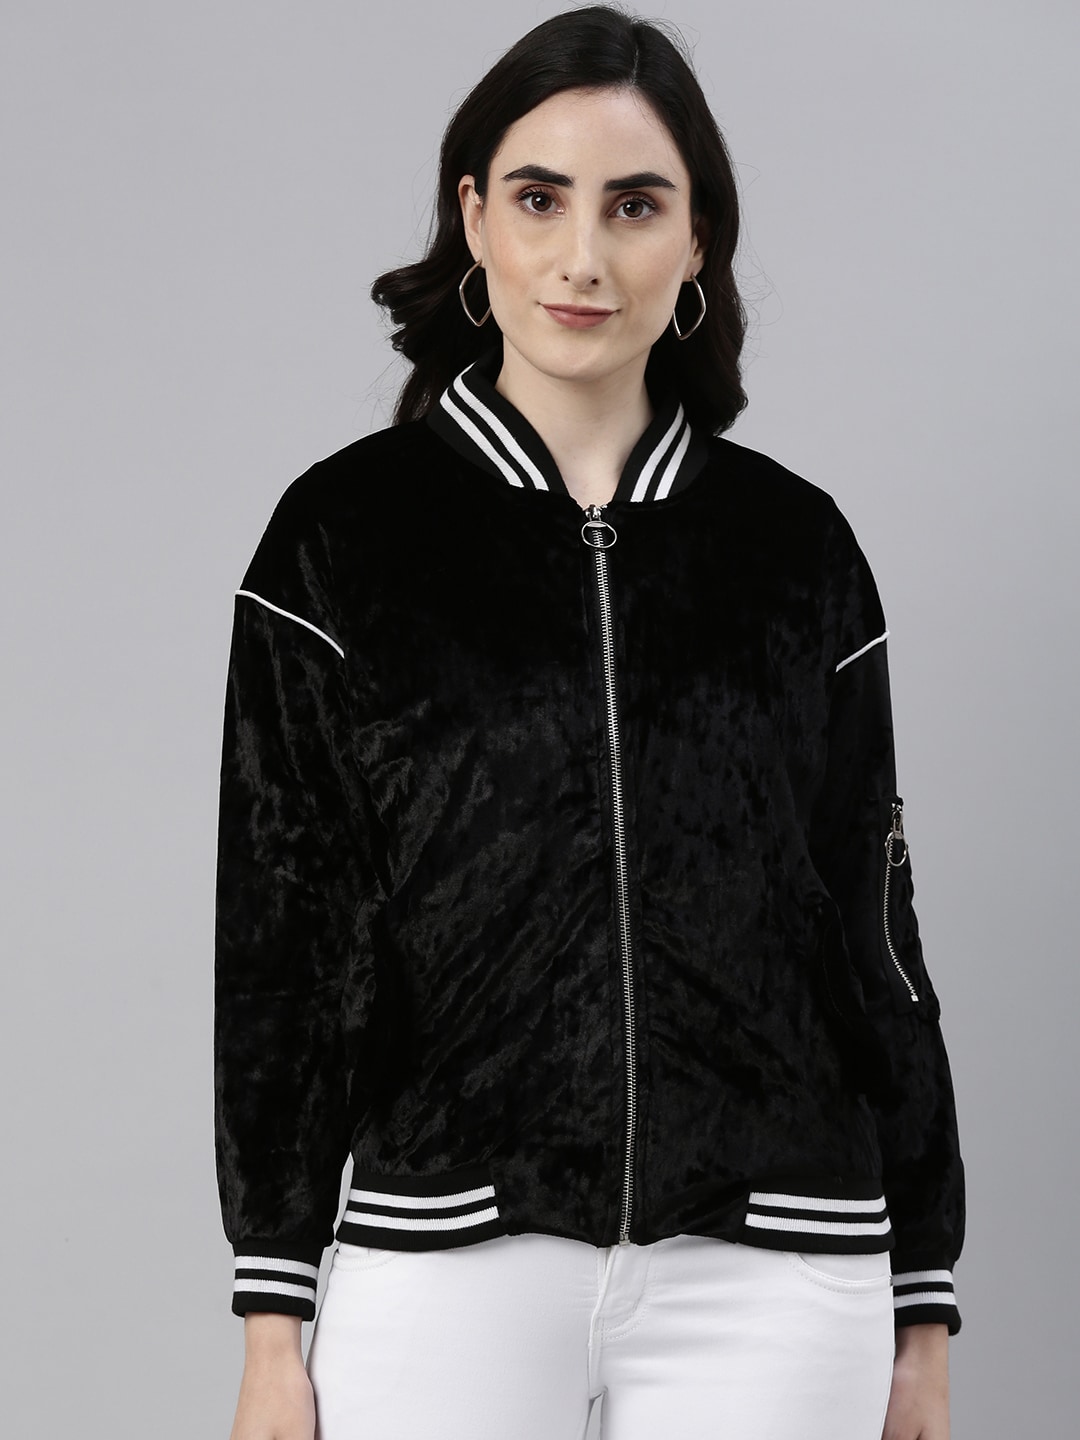 Campus Sutra Women Black Outdoor Satin Bomber Jacket Price in India